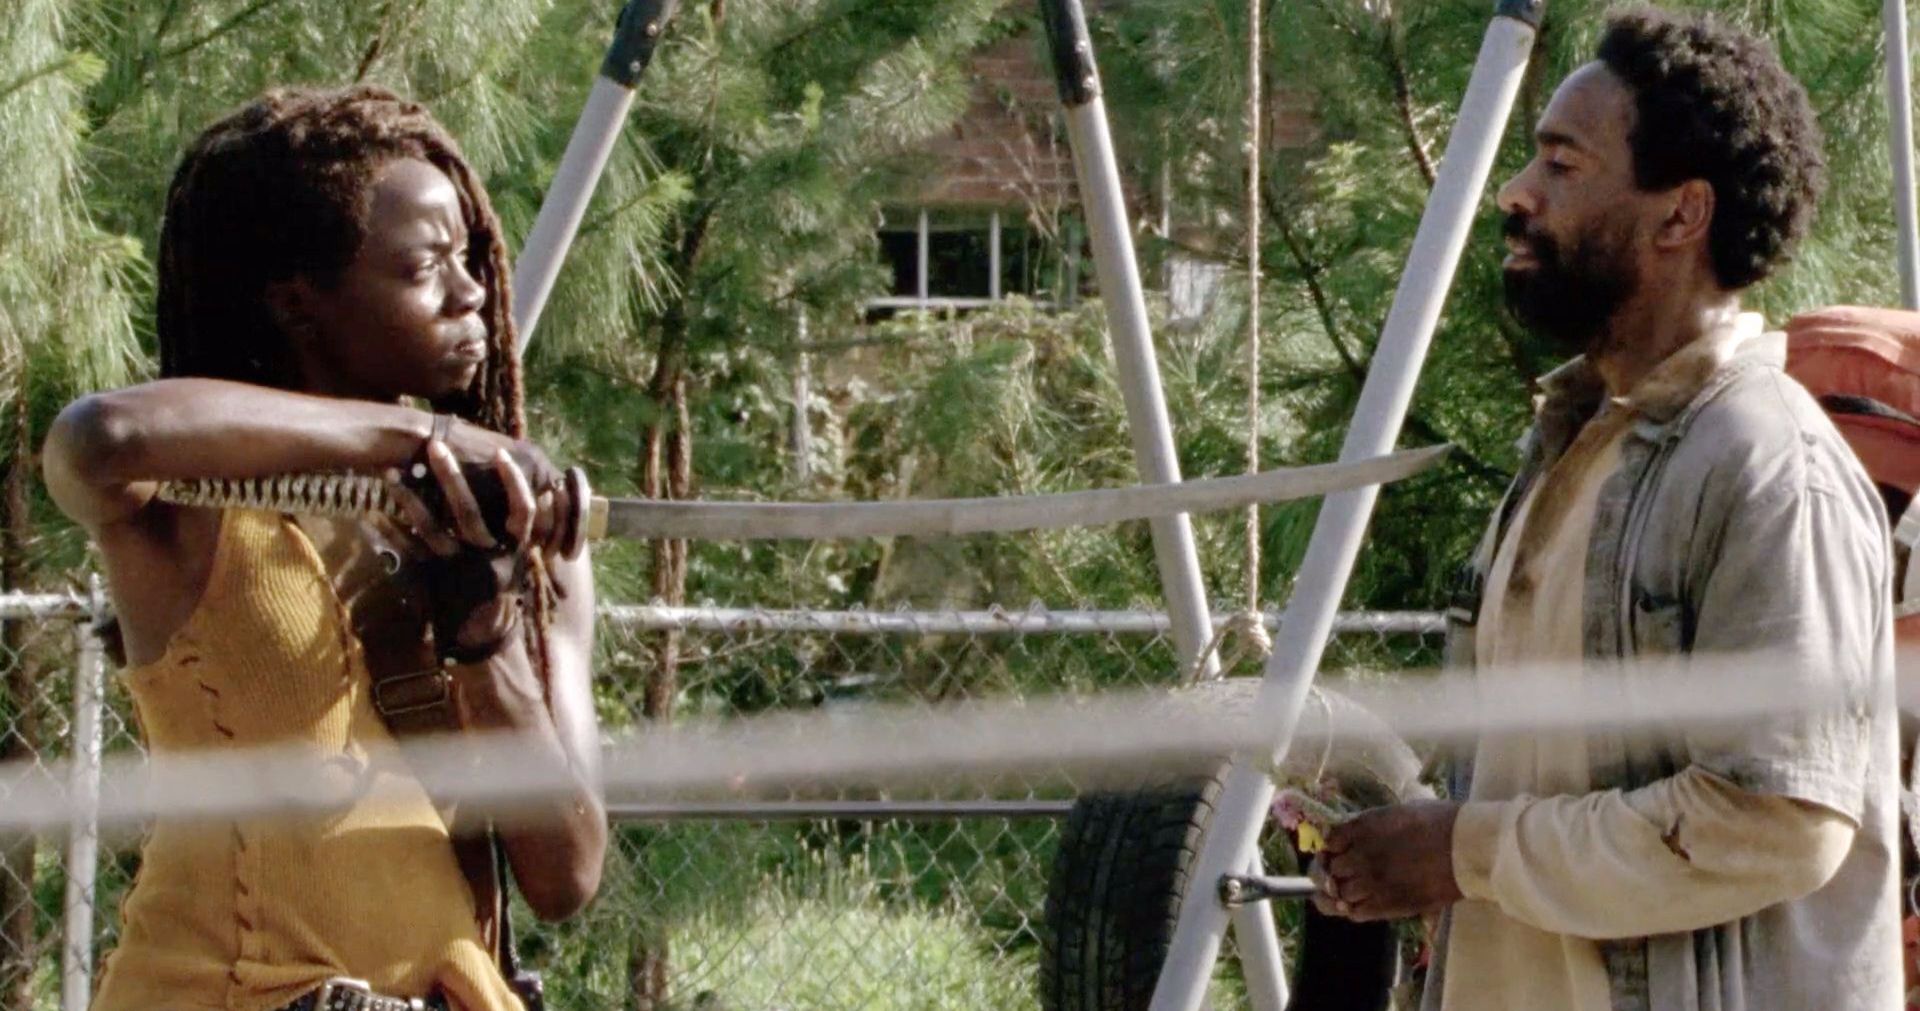 The Walking Dead Episode 10.13 Recap: Michonne Makes a Startling Discovery